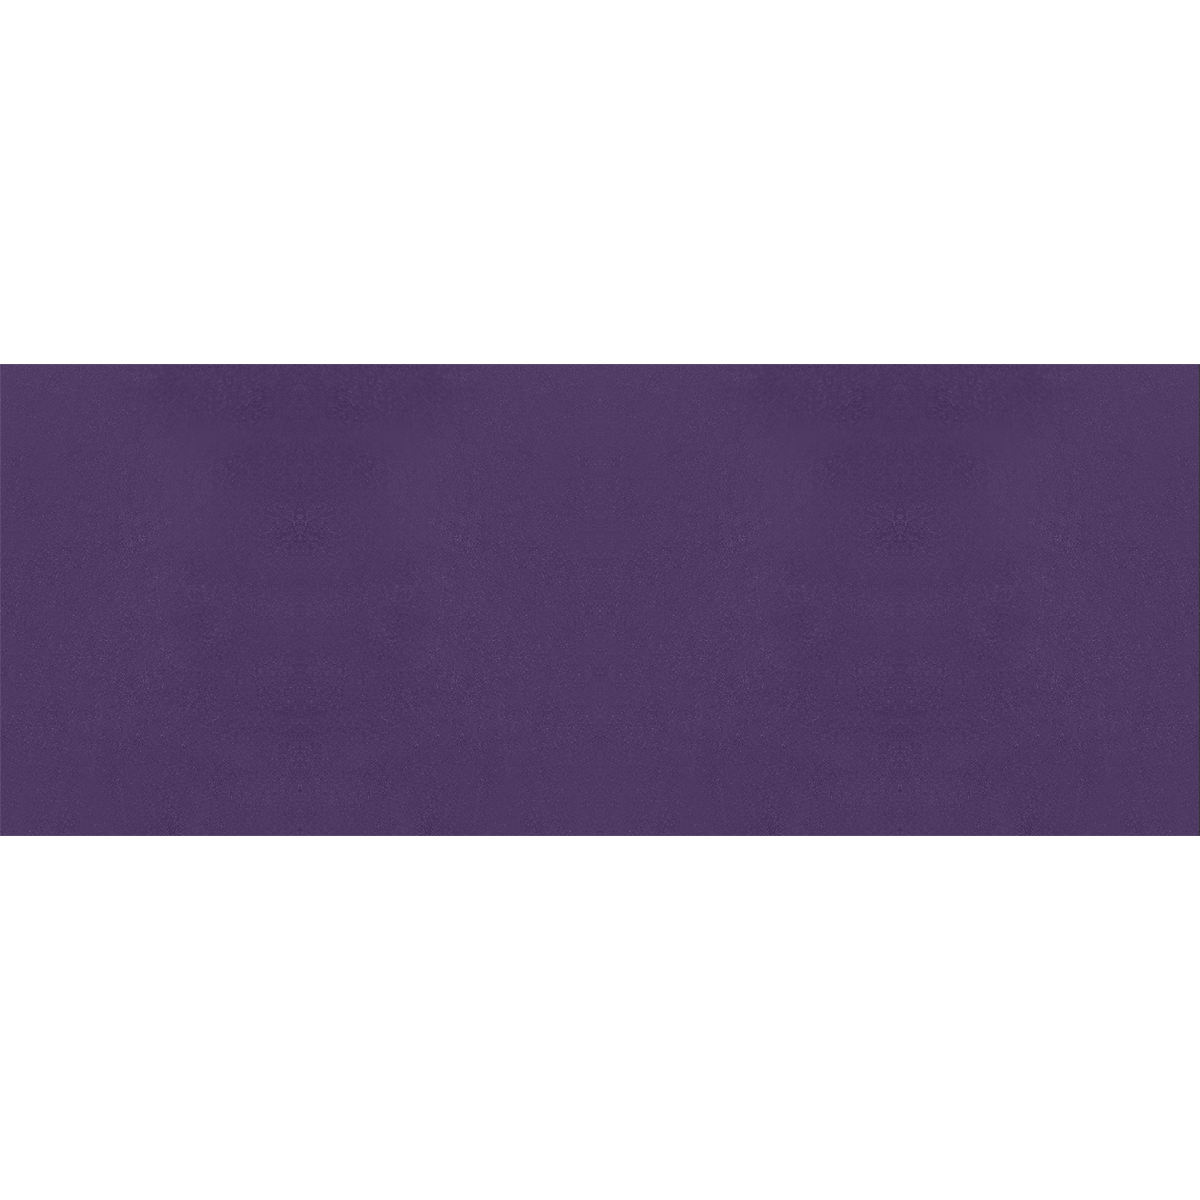 color Russian violet Gift Wrapping Paper 58"x 23" (1 Roll)